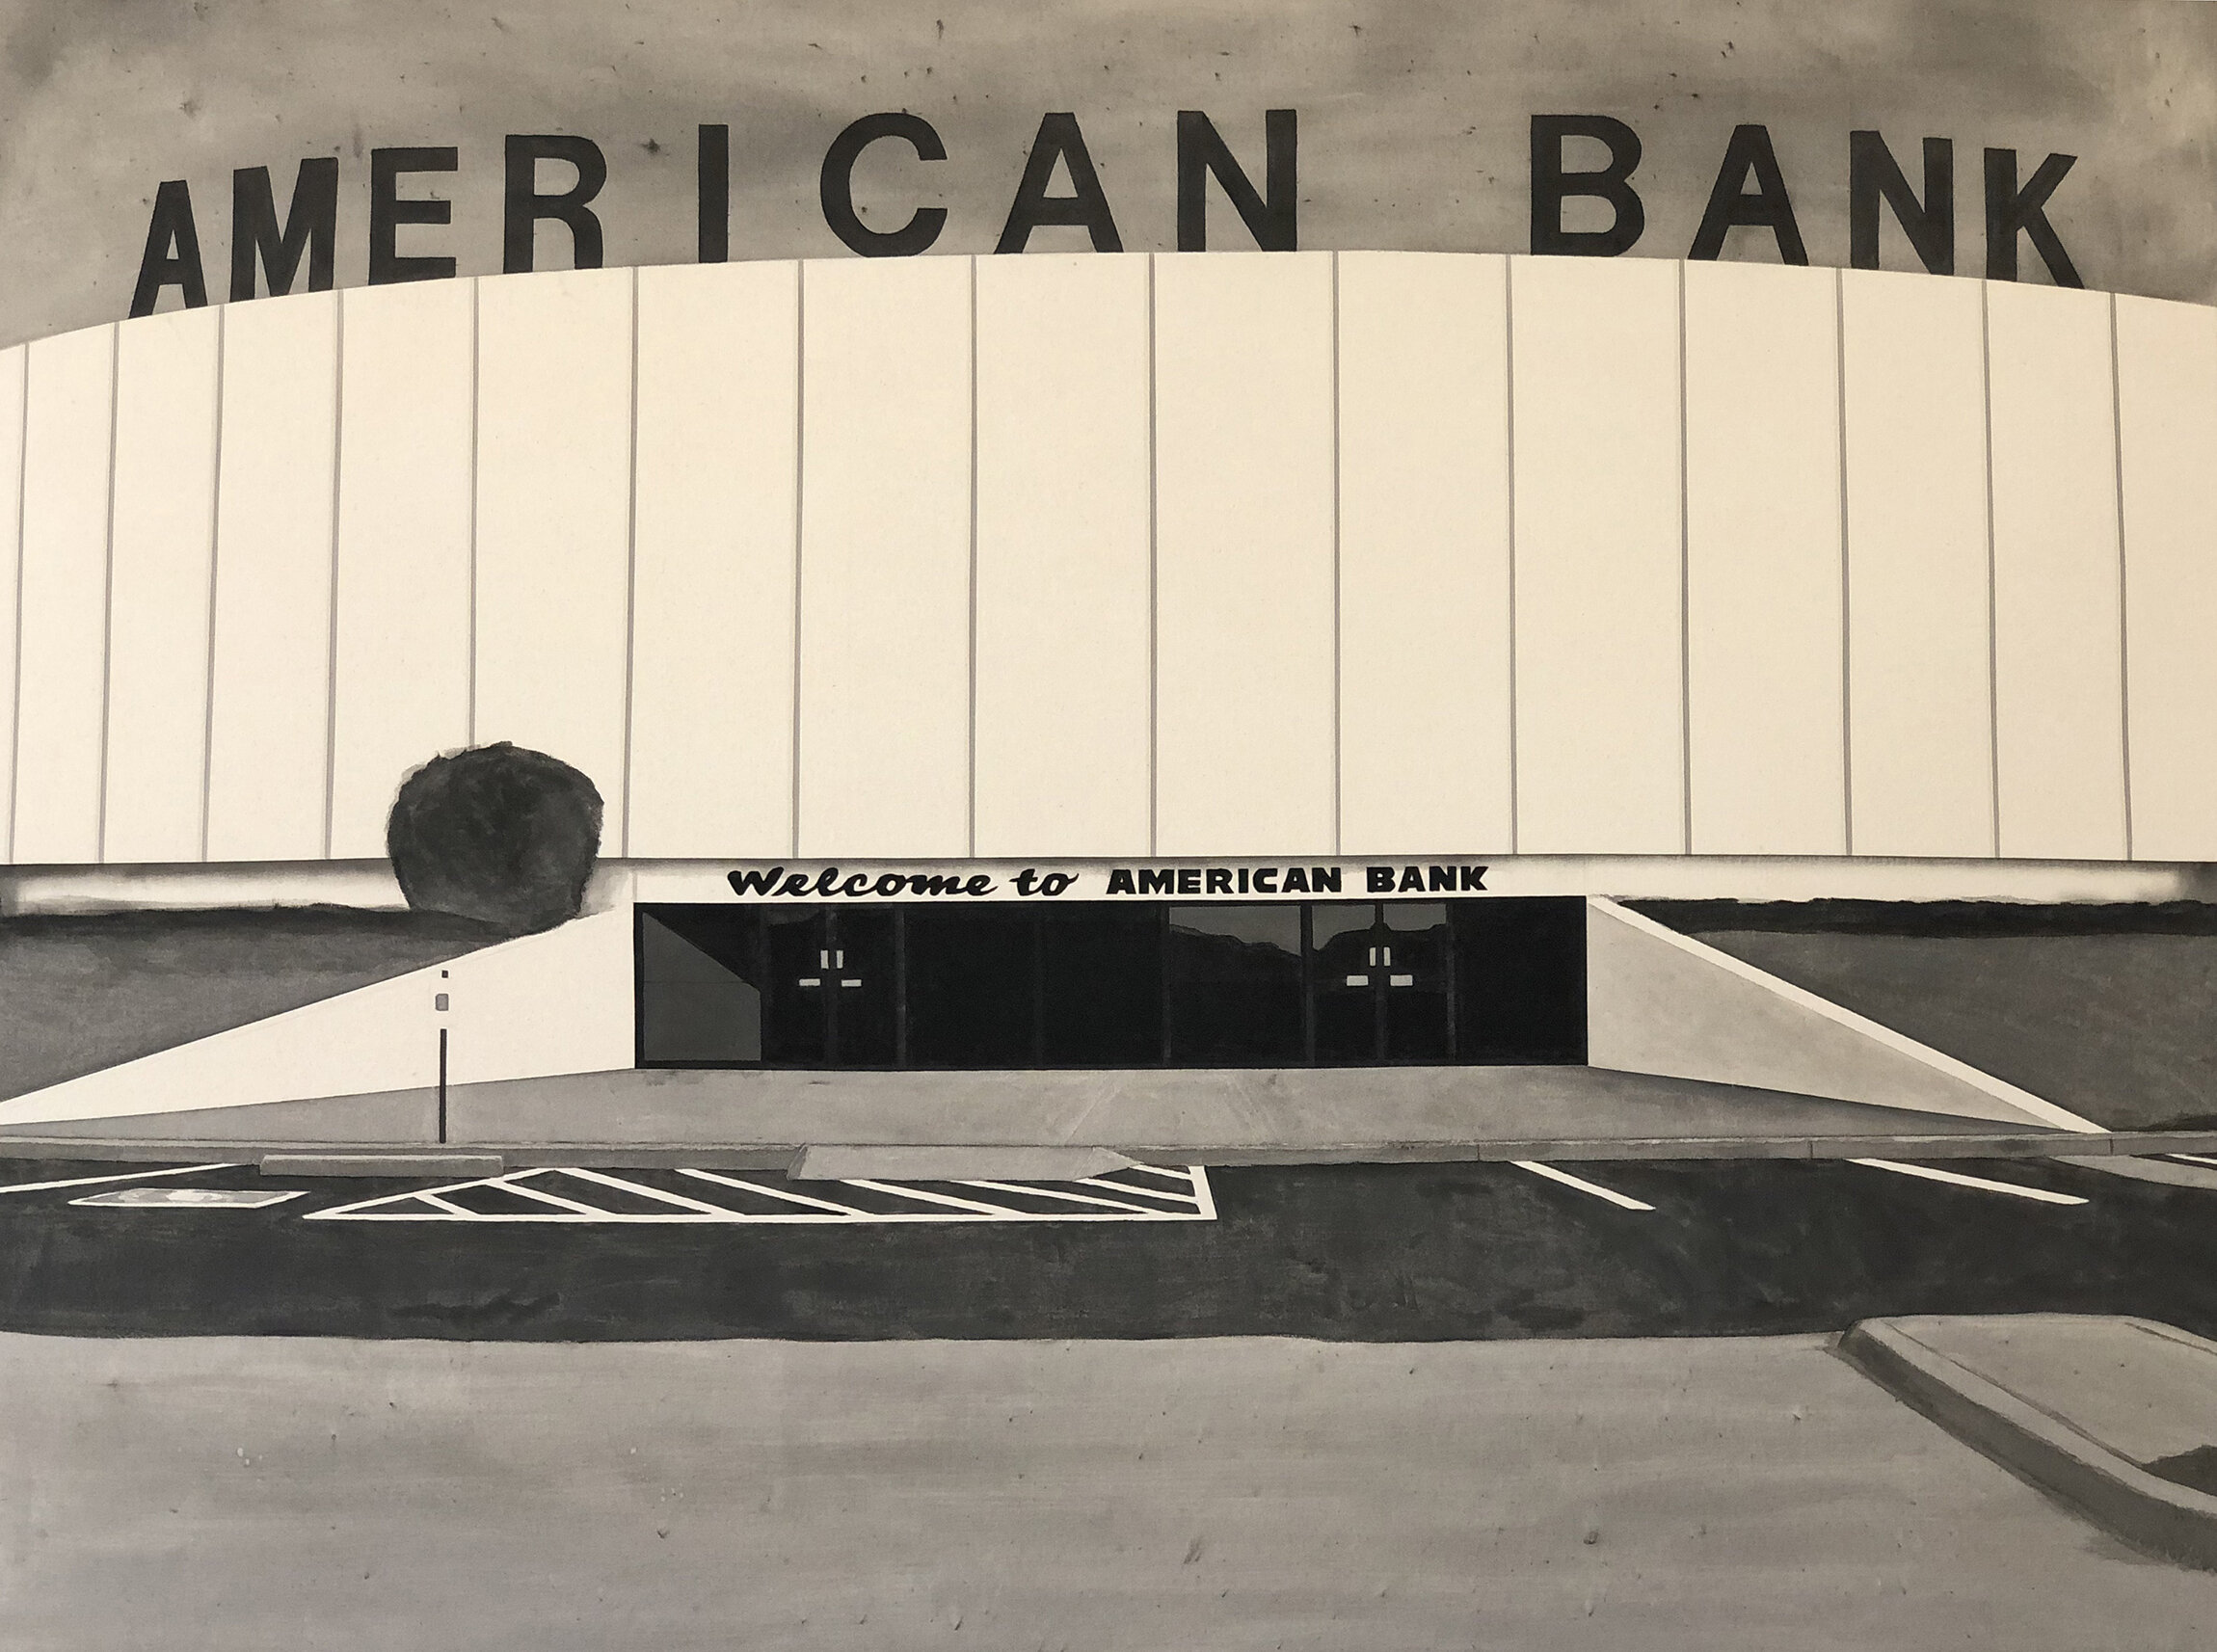   American Bank  [detail], 2020 Black gesso on canvas 74 x 77 inches (1.87m x 1.95m) 